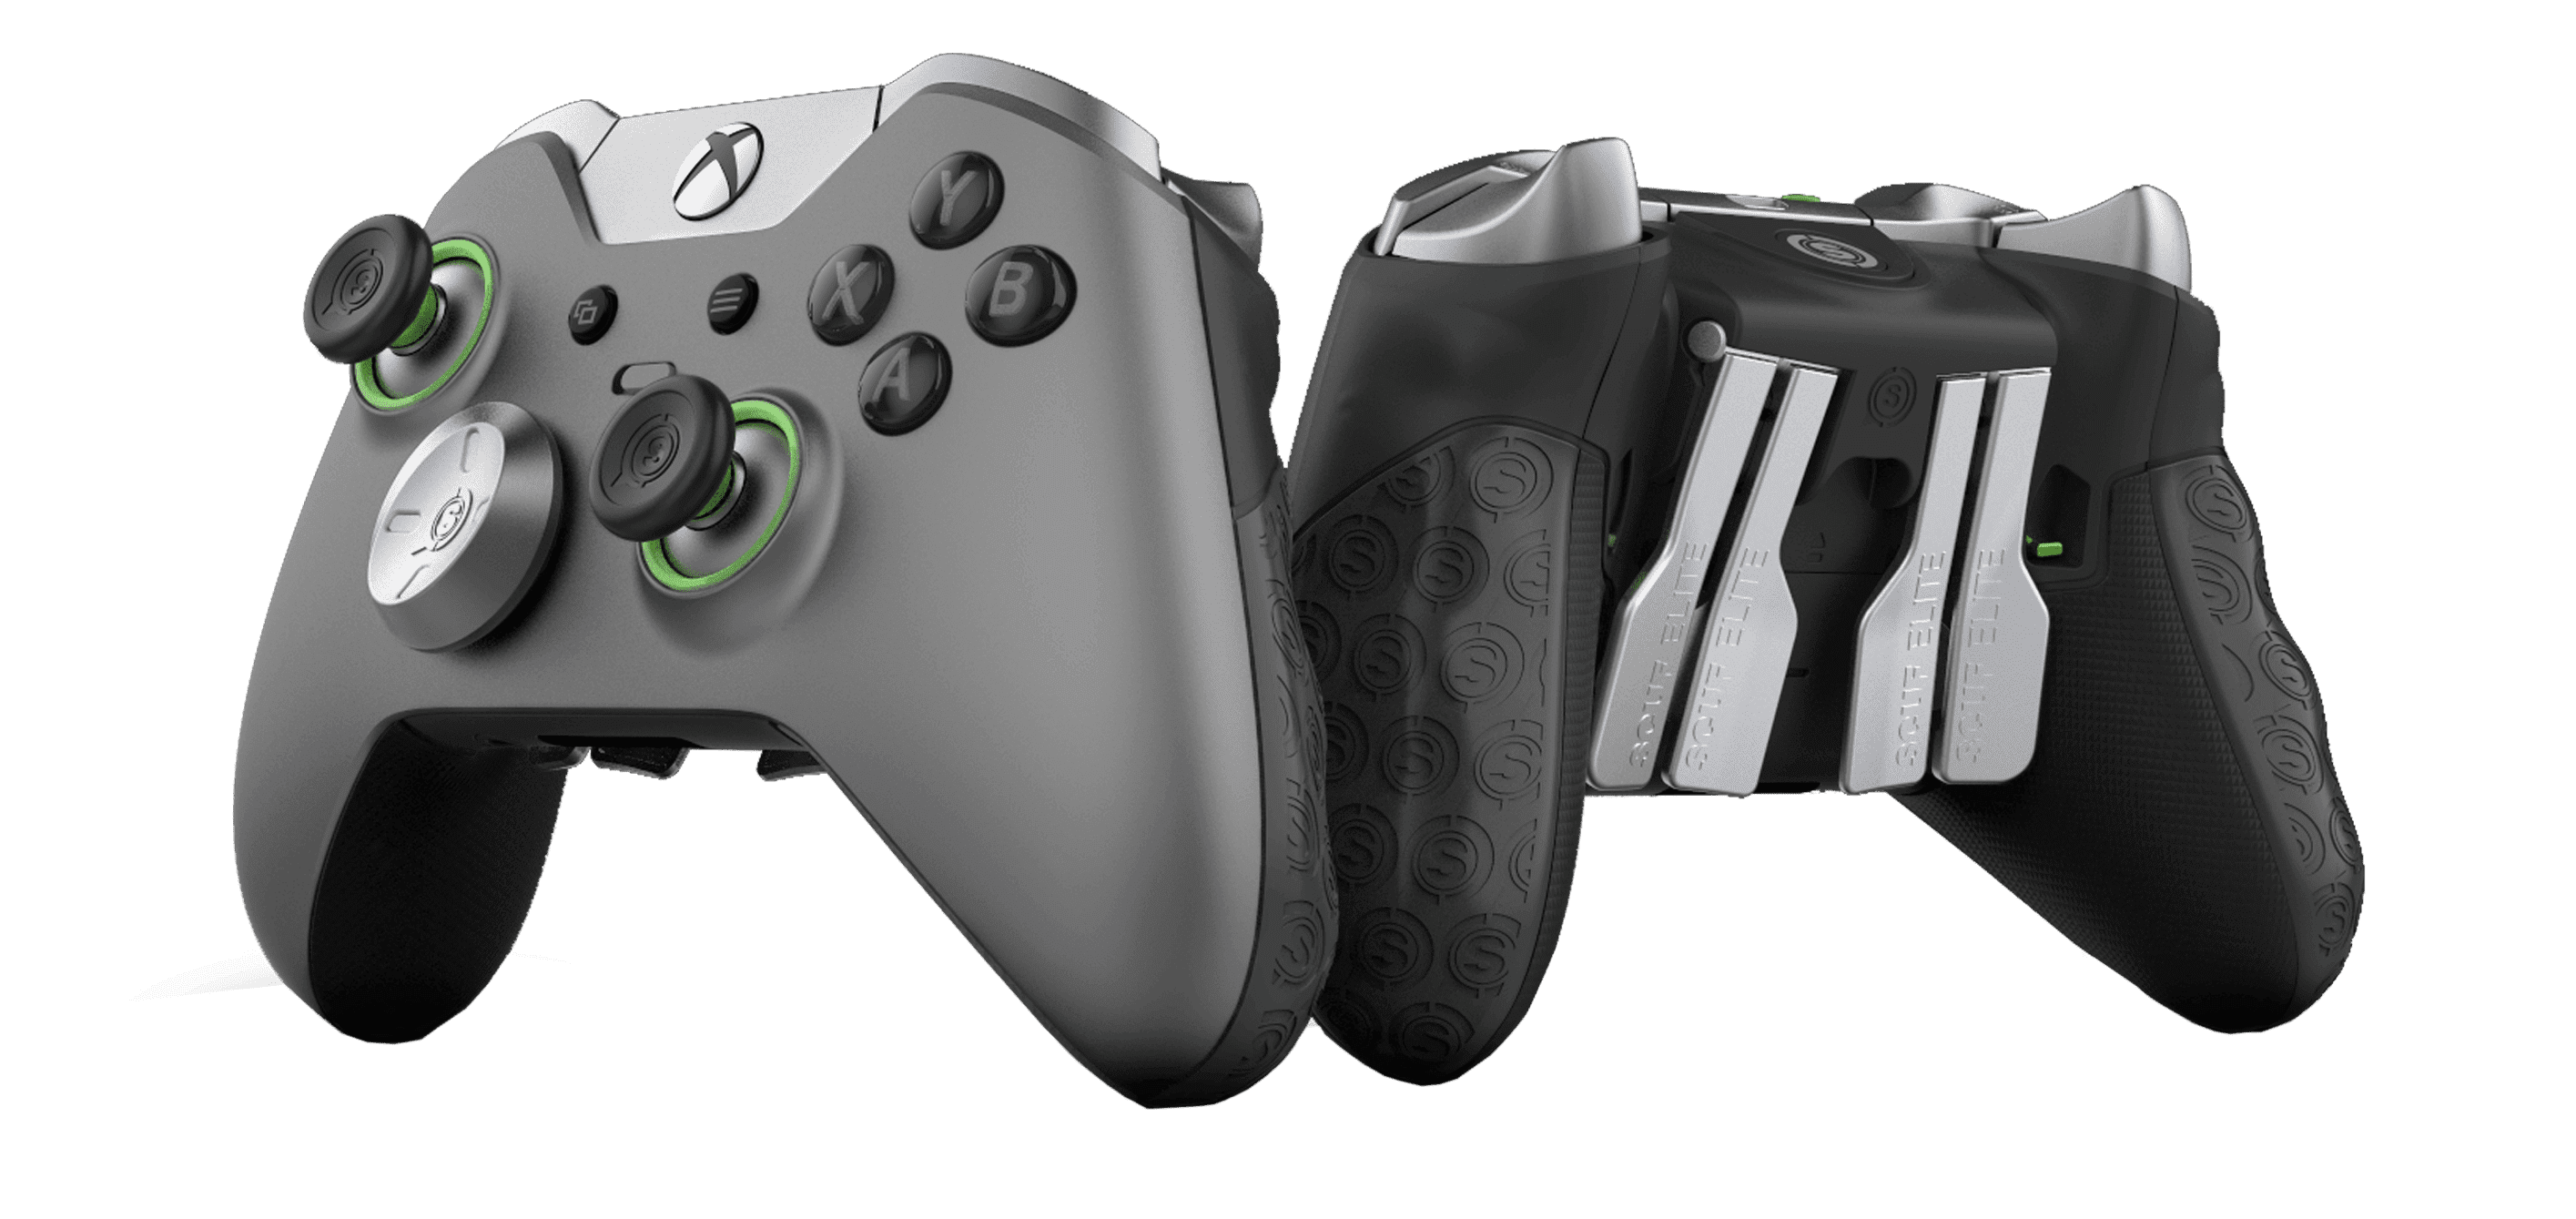 YOUR PERSONALIZED CONTROLLER FOR COMPETITION.